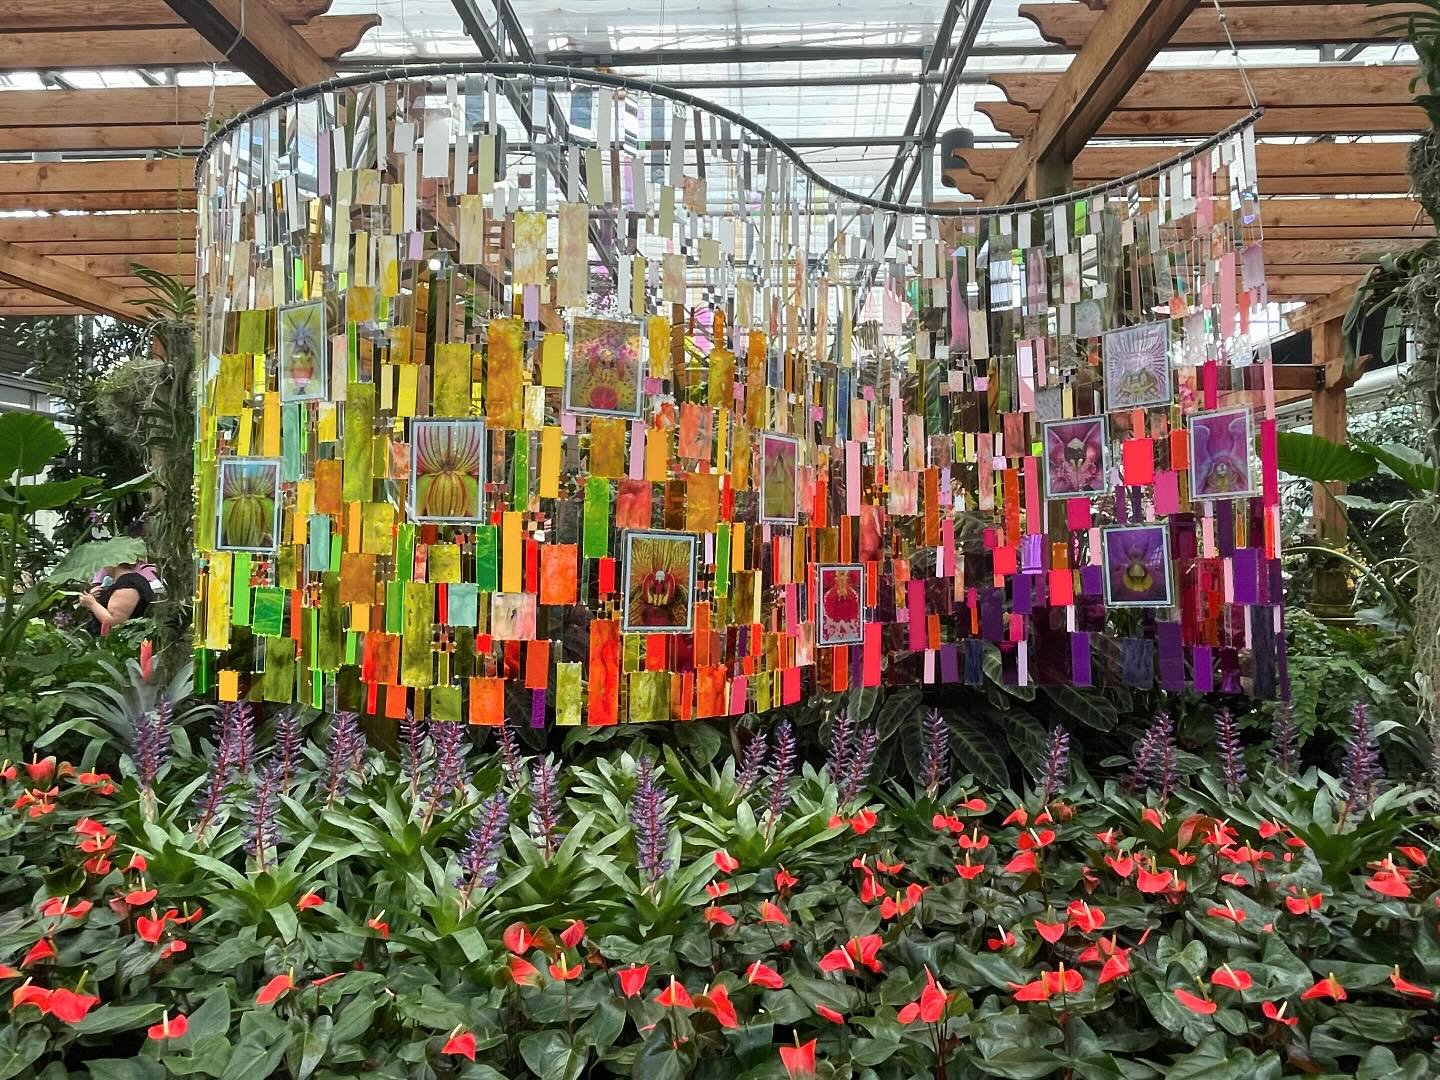 Beautiful installation in The Orchid House @atlbotanical  gardens. A whole lot of uplift! #gardens #gardensofinstagram #orchids #gardenstagram #atlantabotanicalgarden #beauty #blossoms #uplift #seeingtrue #ronaldchapman